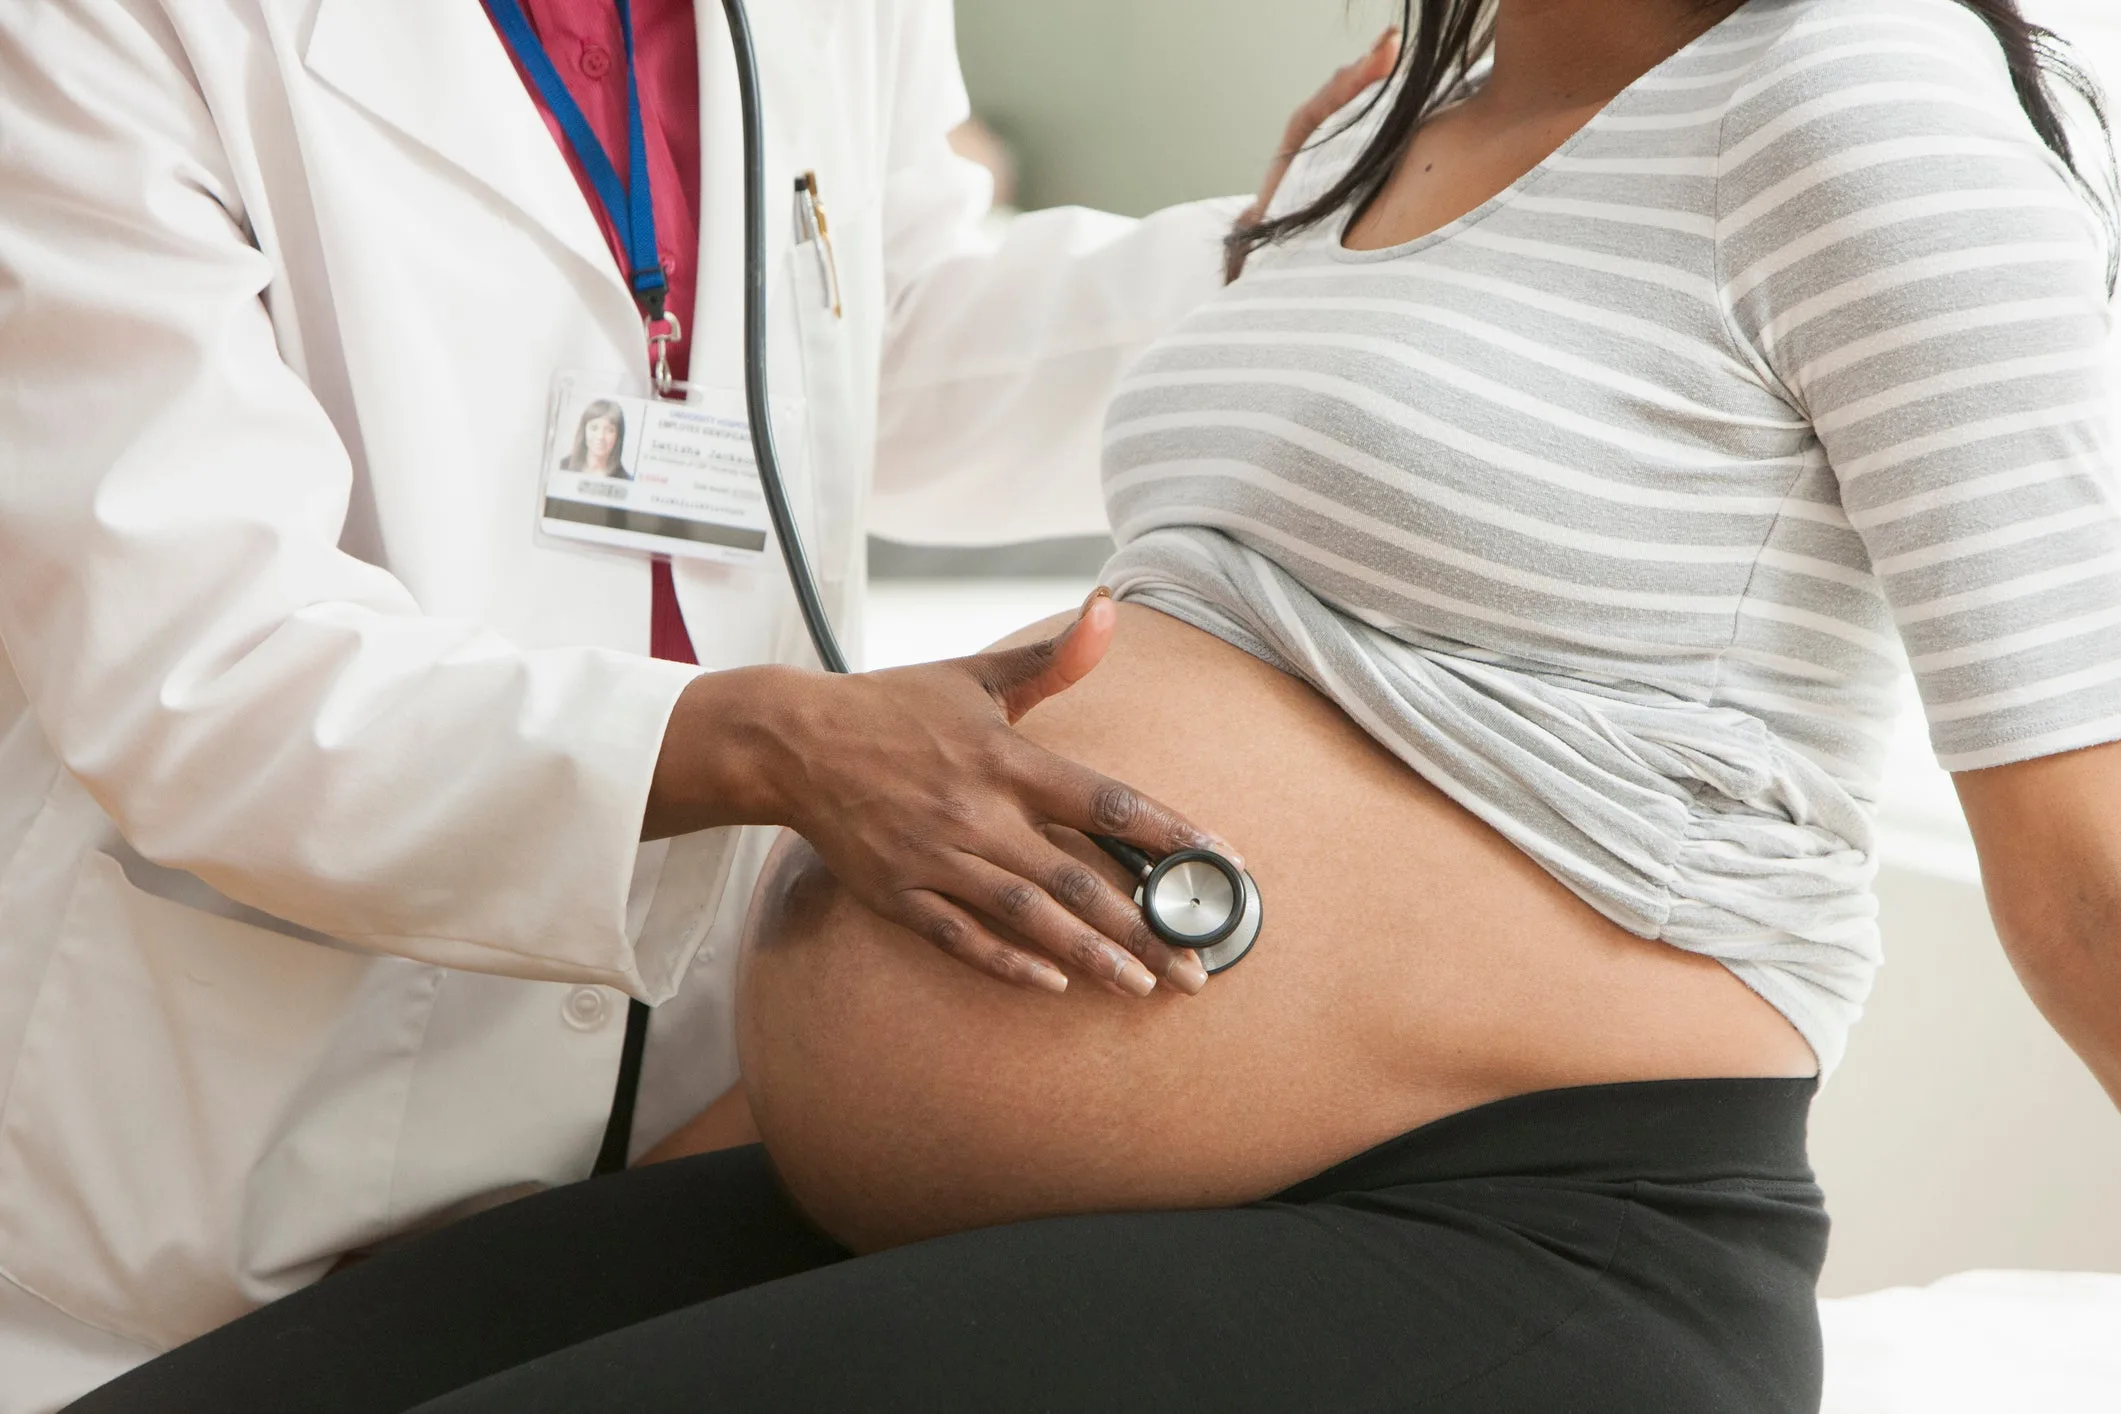 Black Maternal Health Matters: What Black OB-GYNs Want You To Know Before You Give Birth